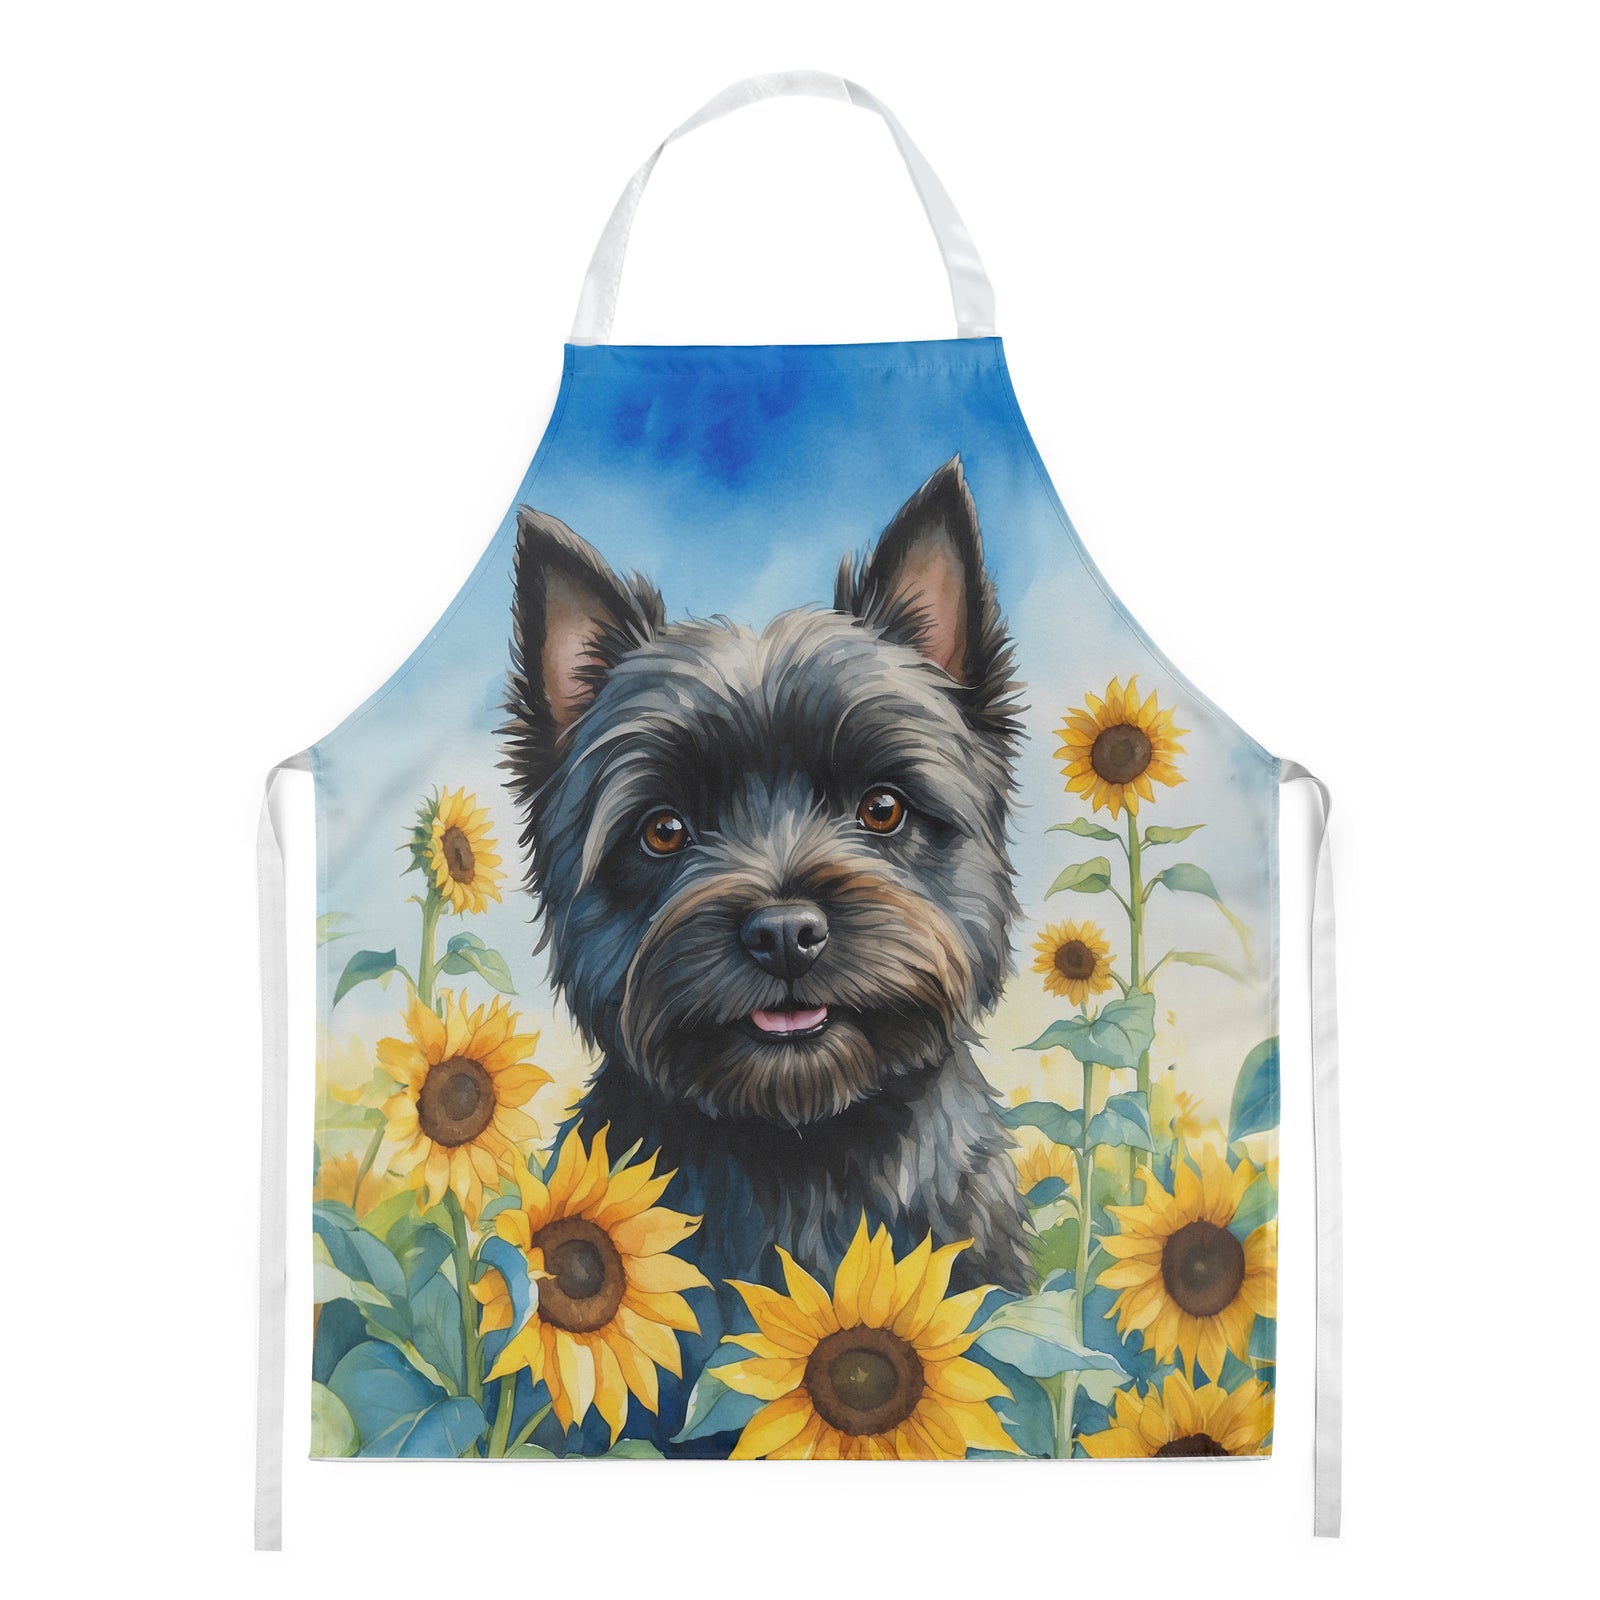 Buy this Cairn Terrier in Sunflowers Apron